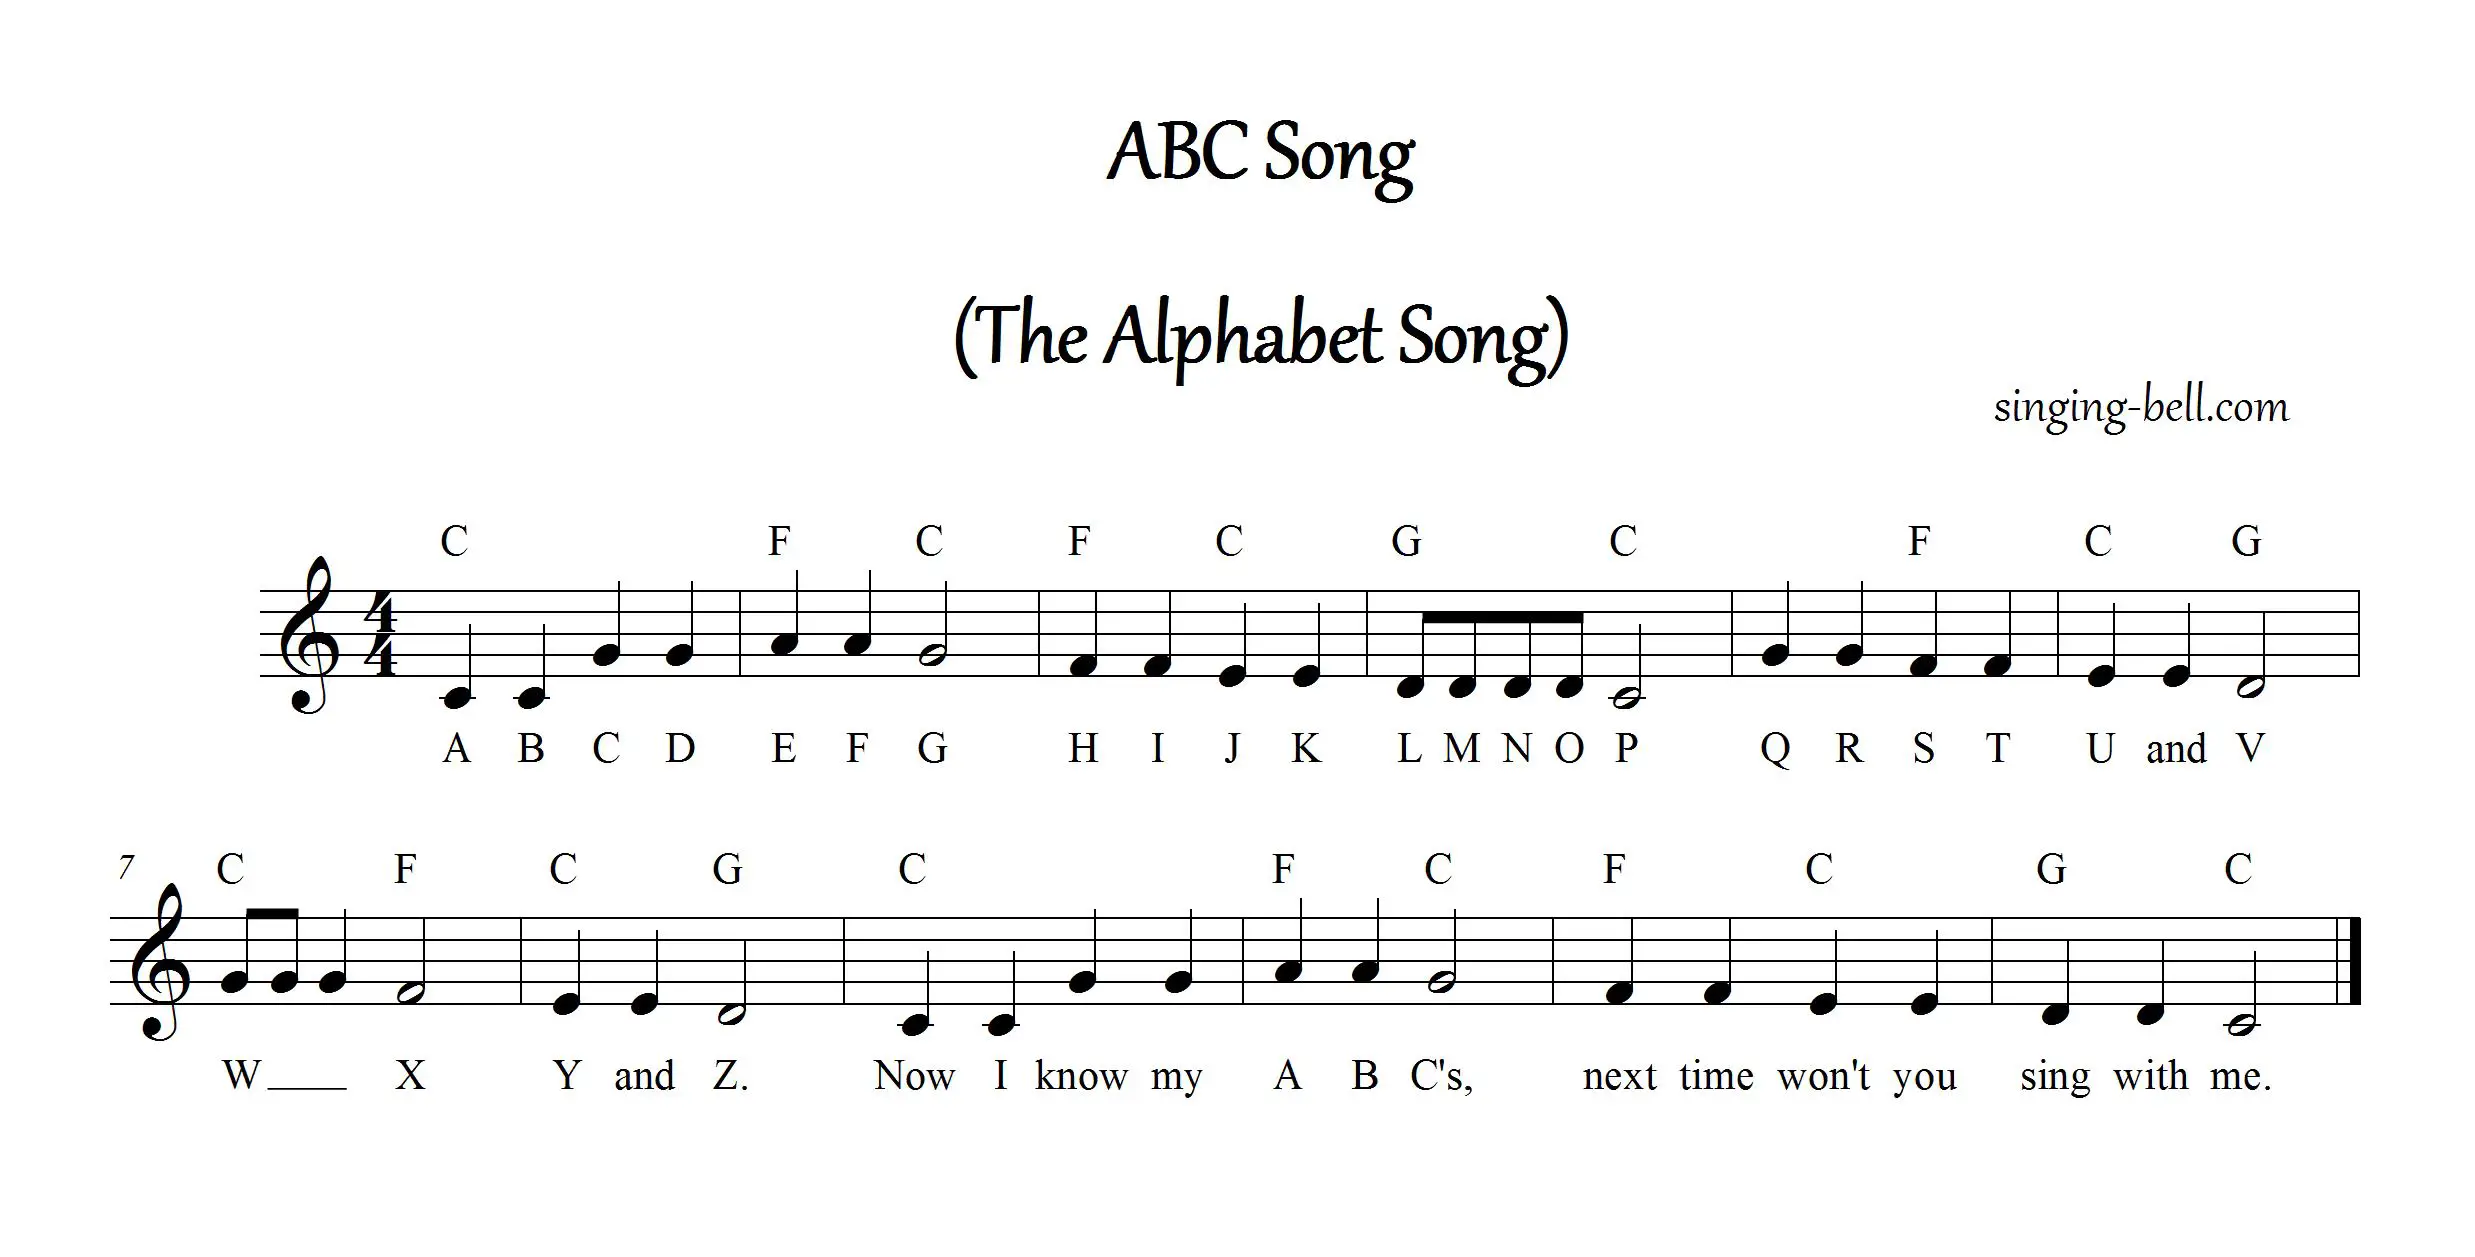 Free Nursery Rhymes > ABC Song (The Alphabet Song) - free mp3 audio